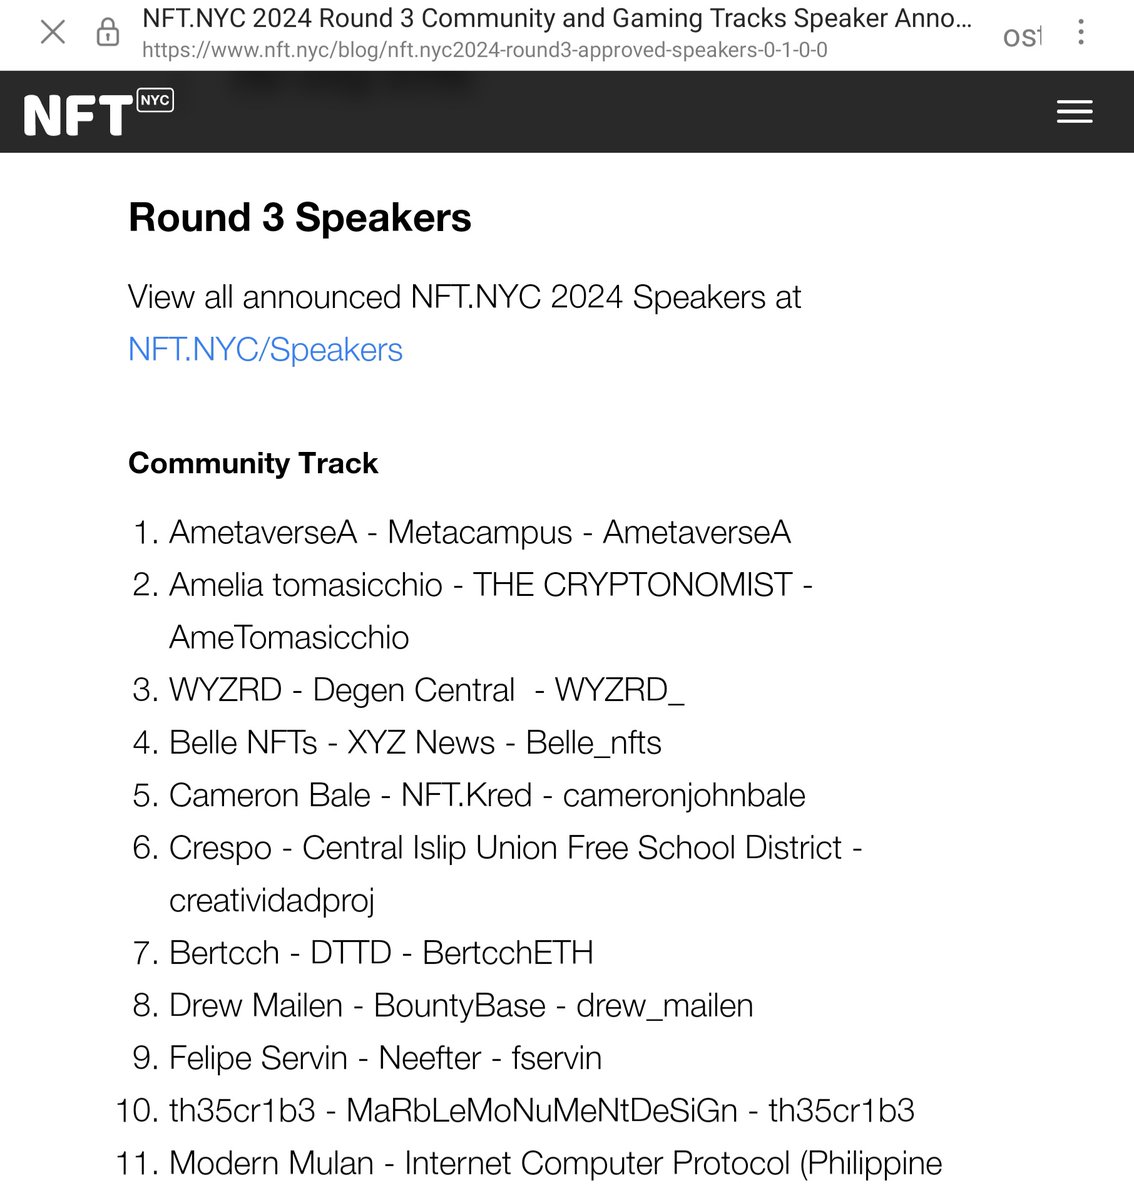 So happy to have been selected as a speaker for @NFT_NYC 😍

@Cryptonomist_en @cryptonomist_ @TheNFTMag @Cryptonomistfra 🥳🥳🥳